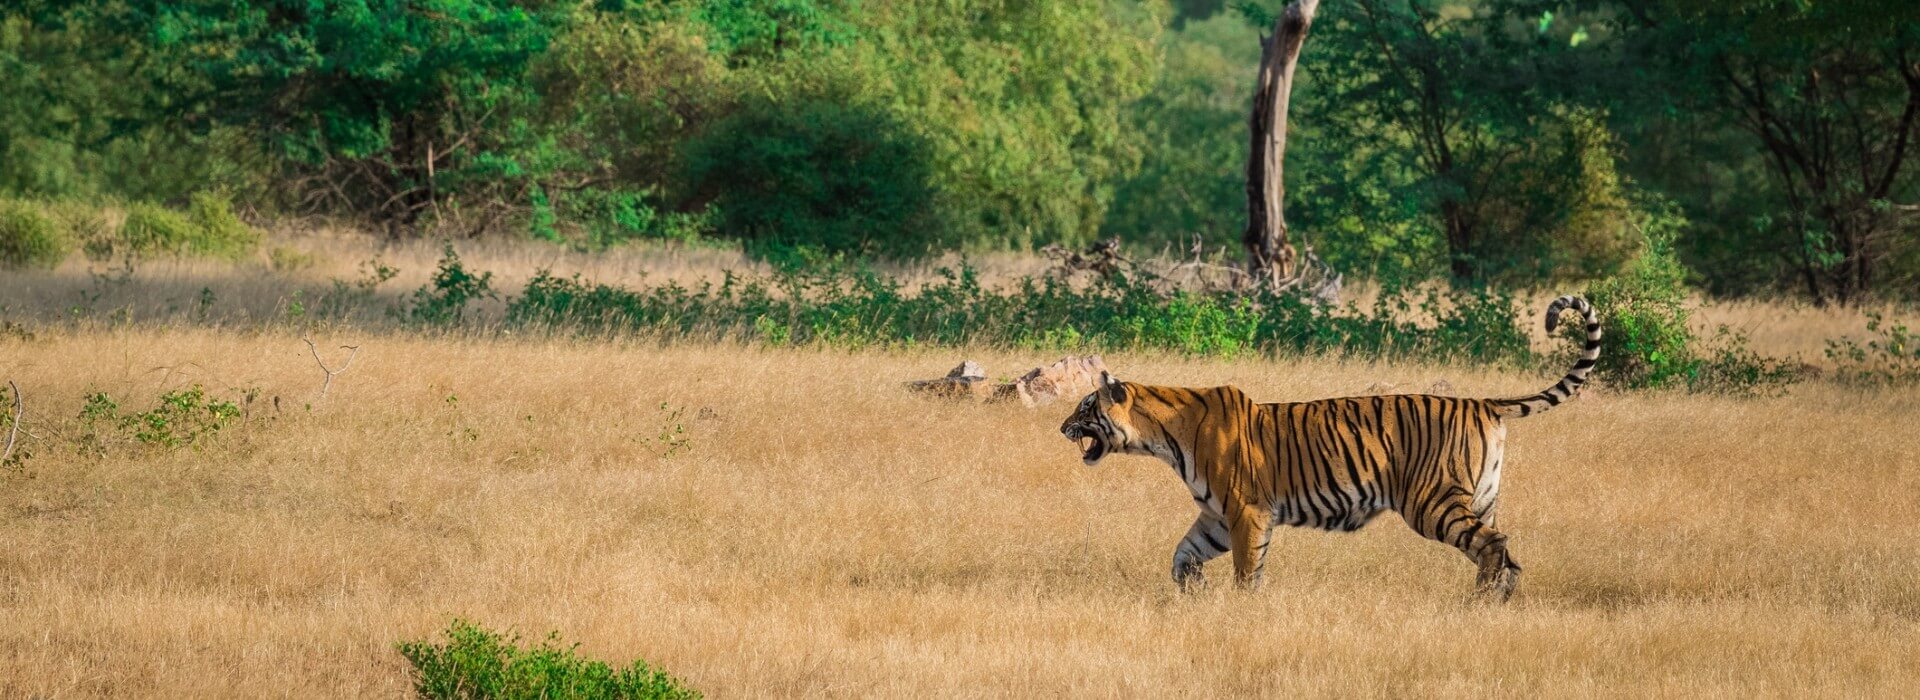 Ranthambore Tour Package From Jaipur - AvaniHolidays